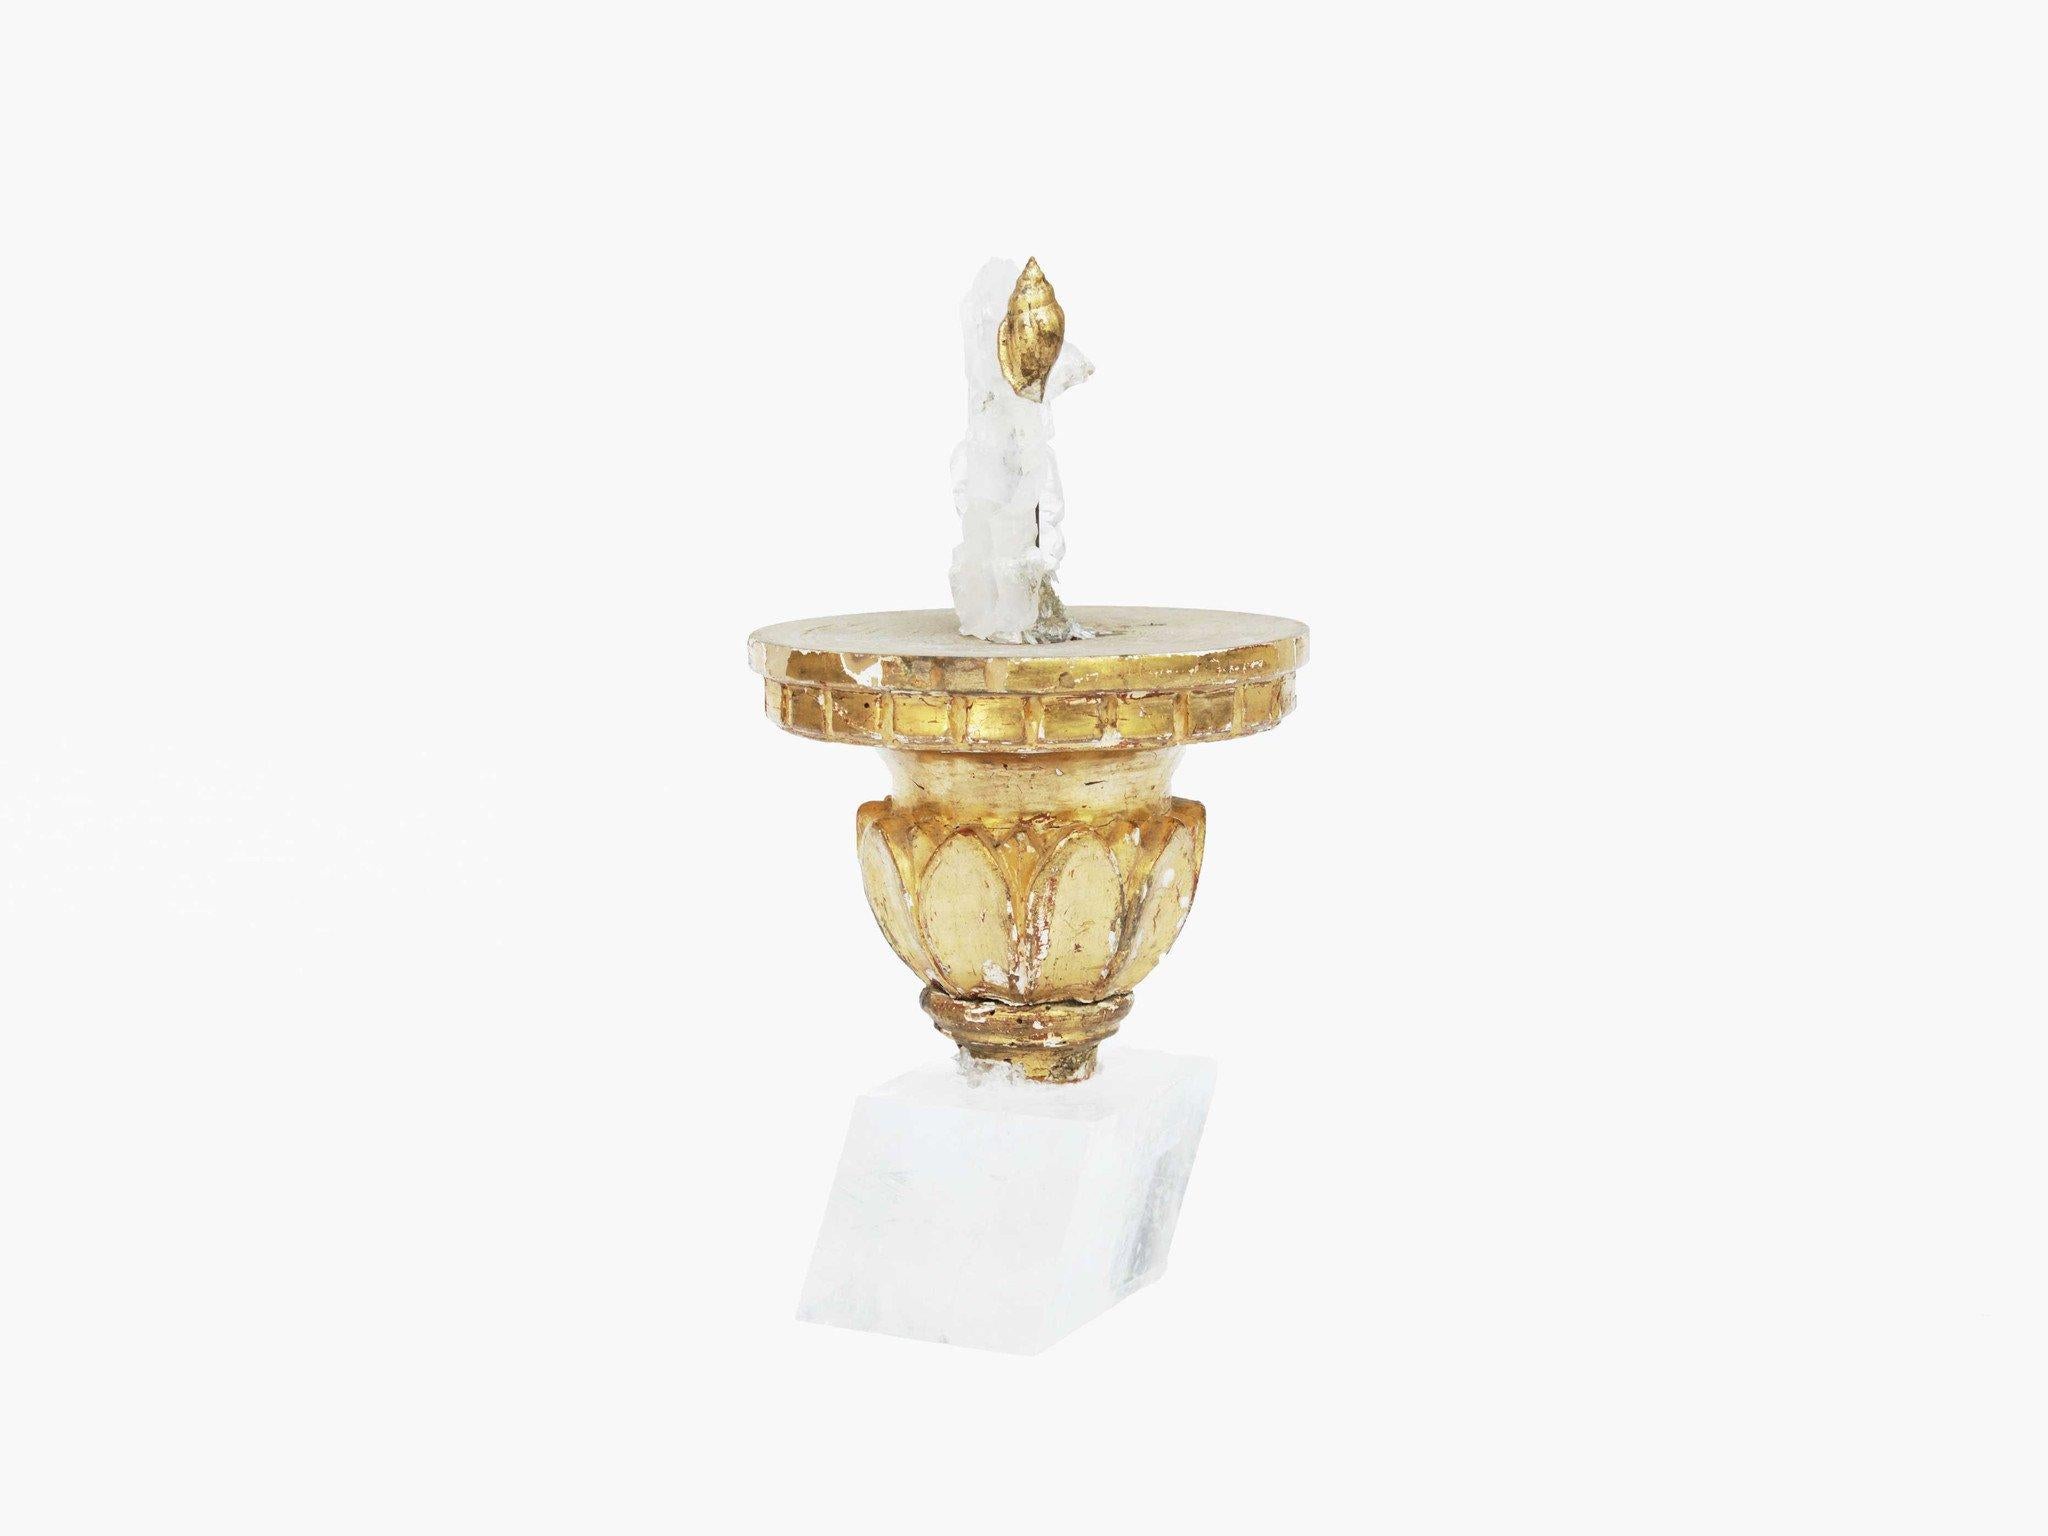 Hand-Carved 18th Century Italian Gold Leaf Candlestick with Faden Crystal on a Calcite Base